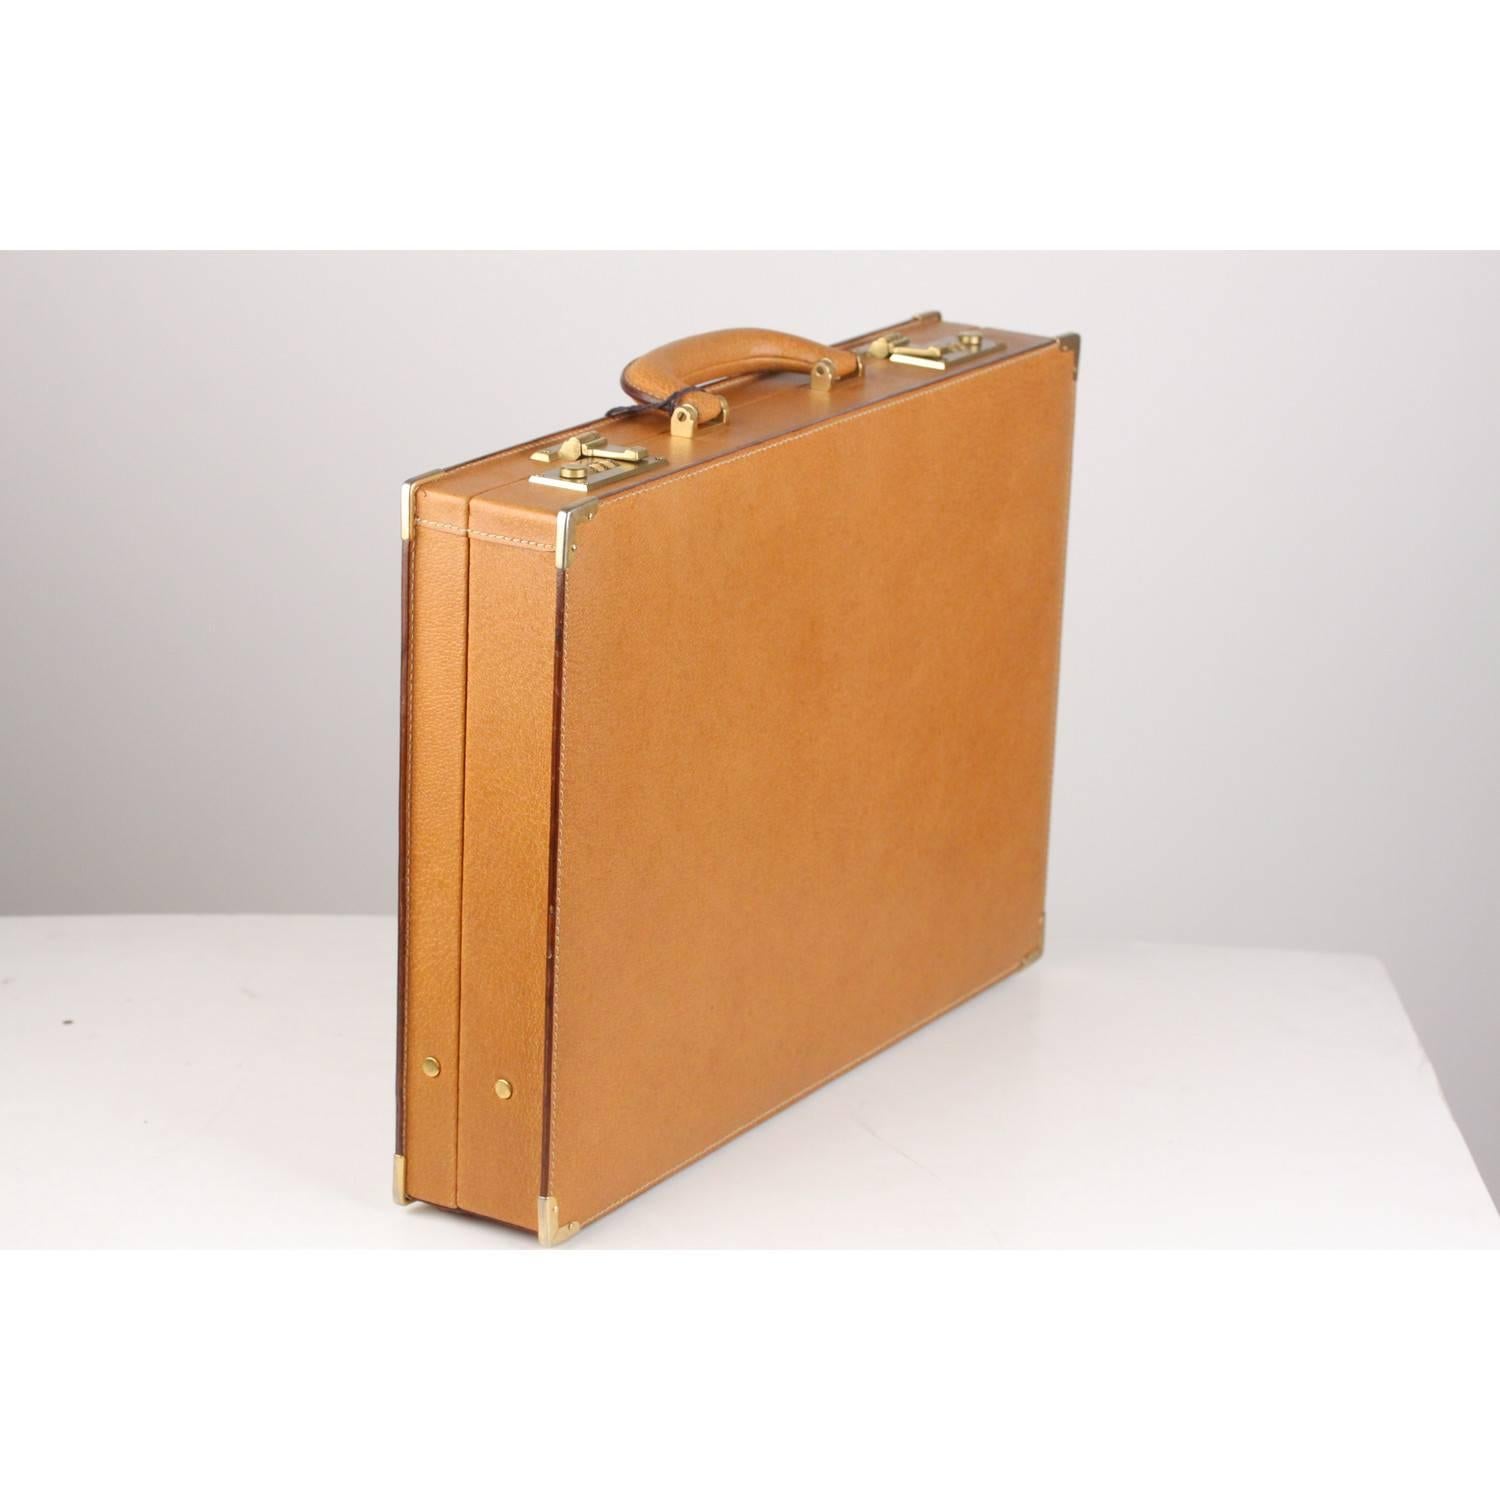 Gorgeous Gucci hard-side briefcase in tan leather. It is big and strong enough to carry your laptop and also provides plenty of space to organize and dived paper work, pens, phone, buisness cards, and more. Double combination lock closures